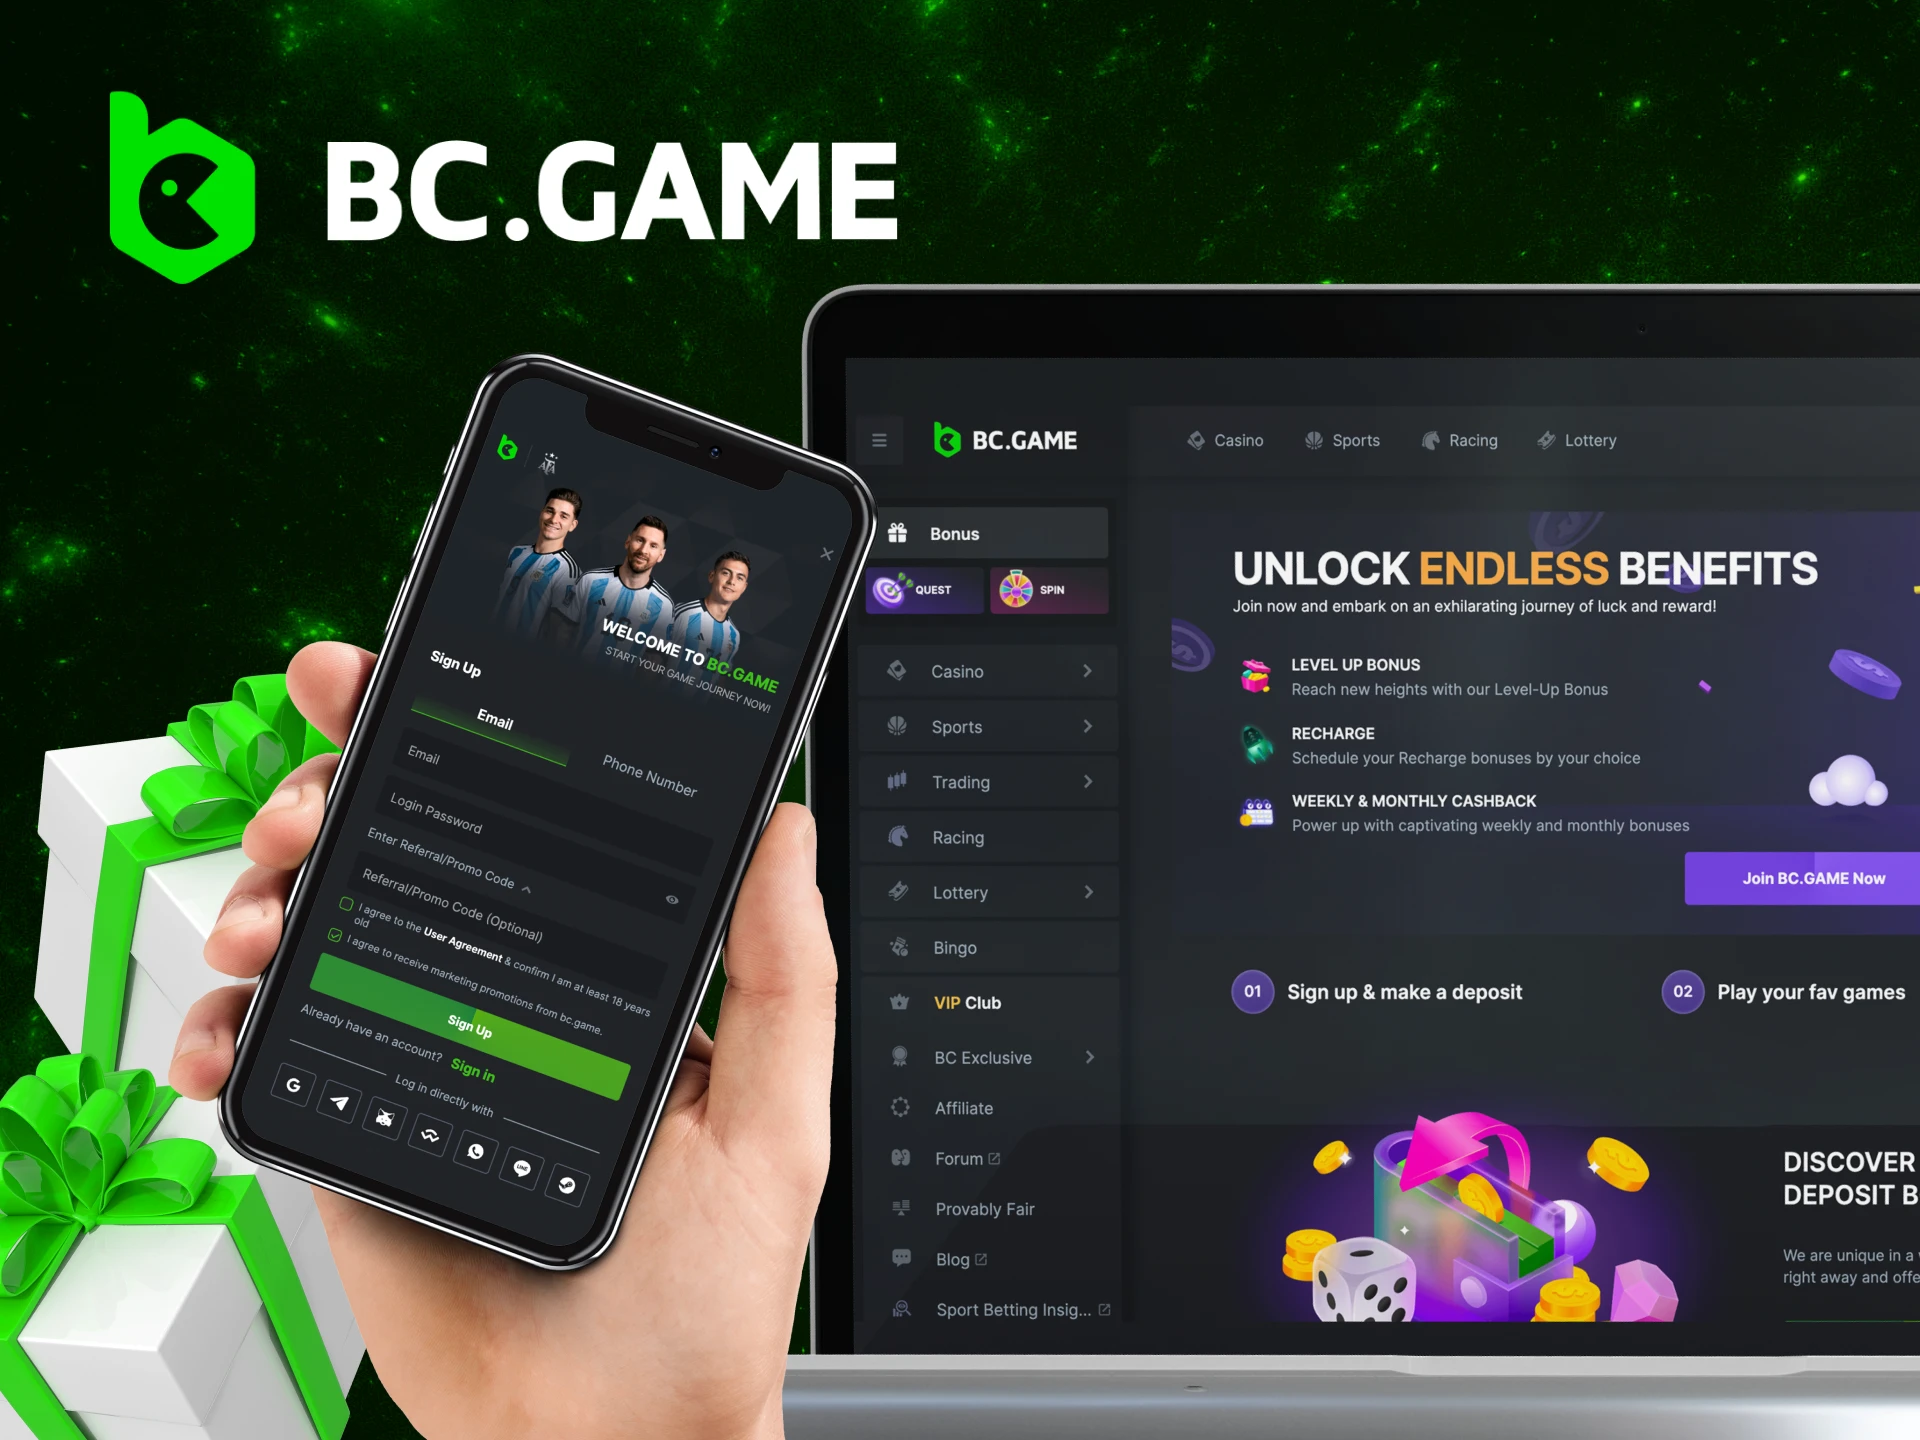 Is there any welcome bonus after registering on the BC Game casino website.